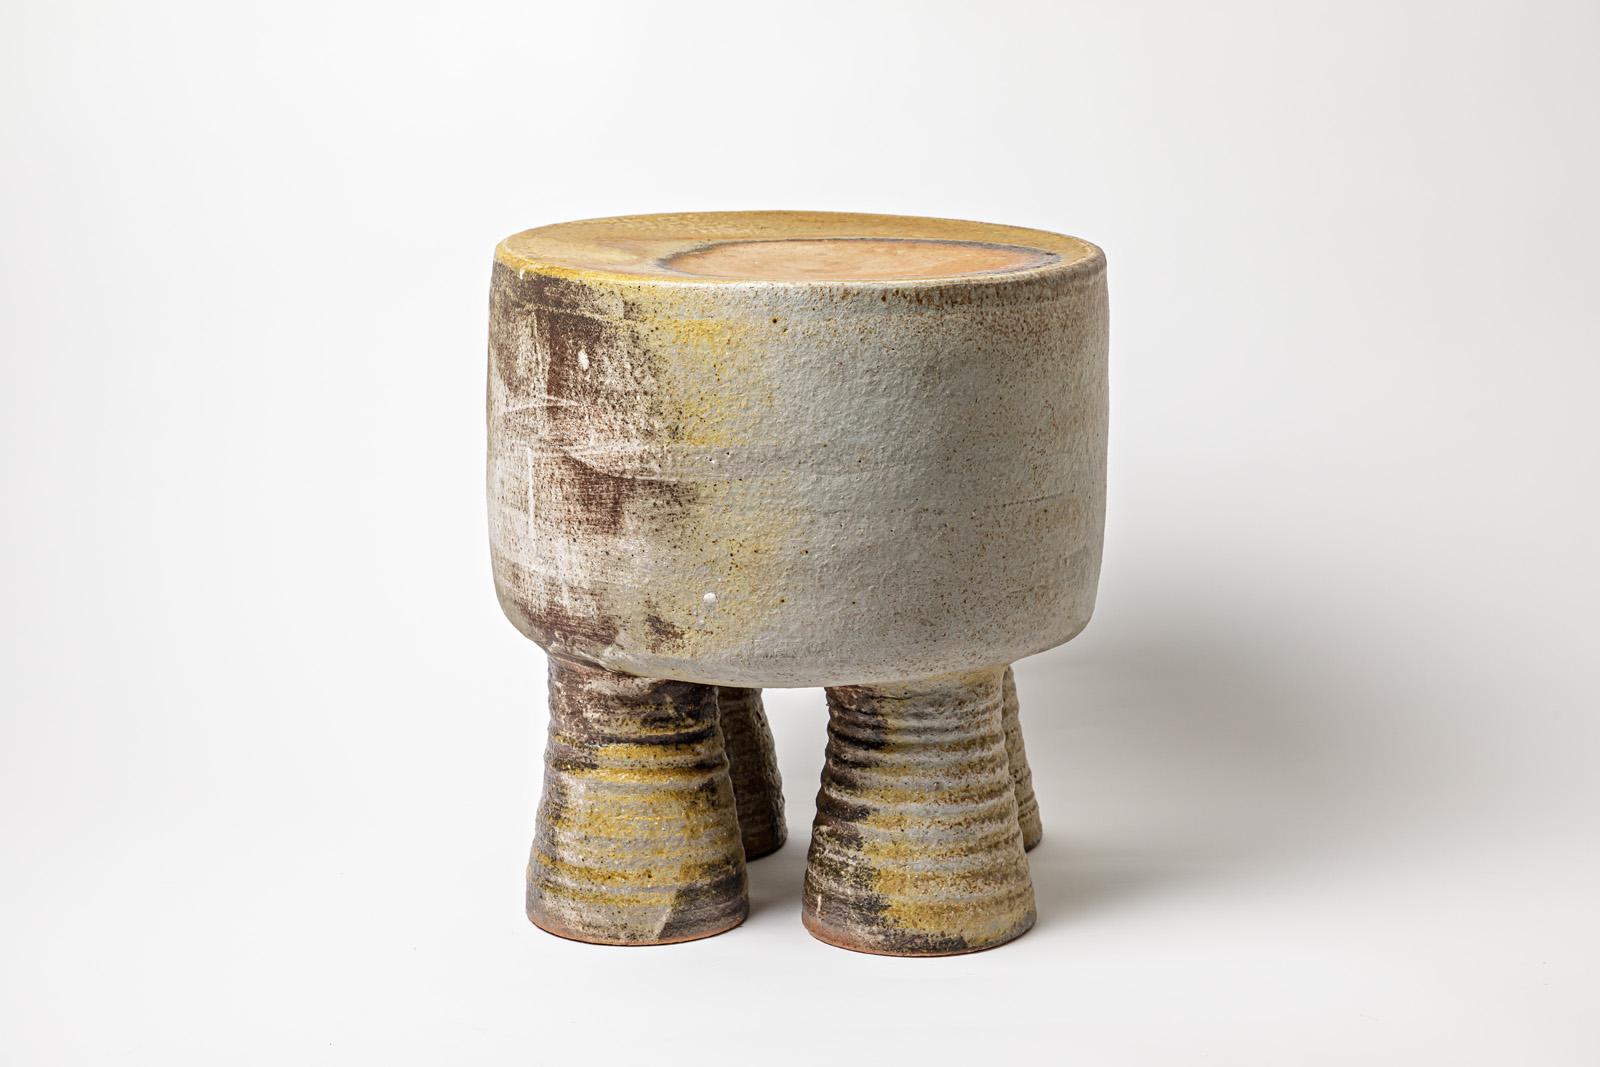 French Wood Fired Ceramic Stool or Coffee Table by Mia Jensen, 2023